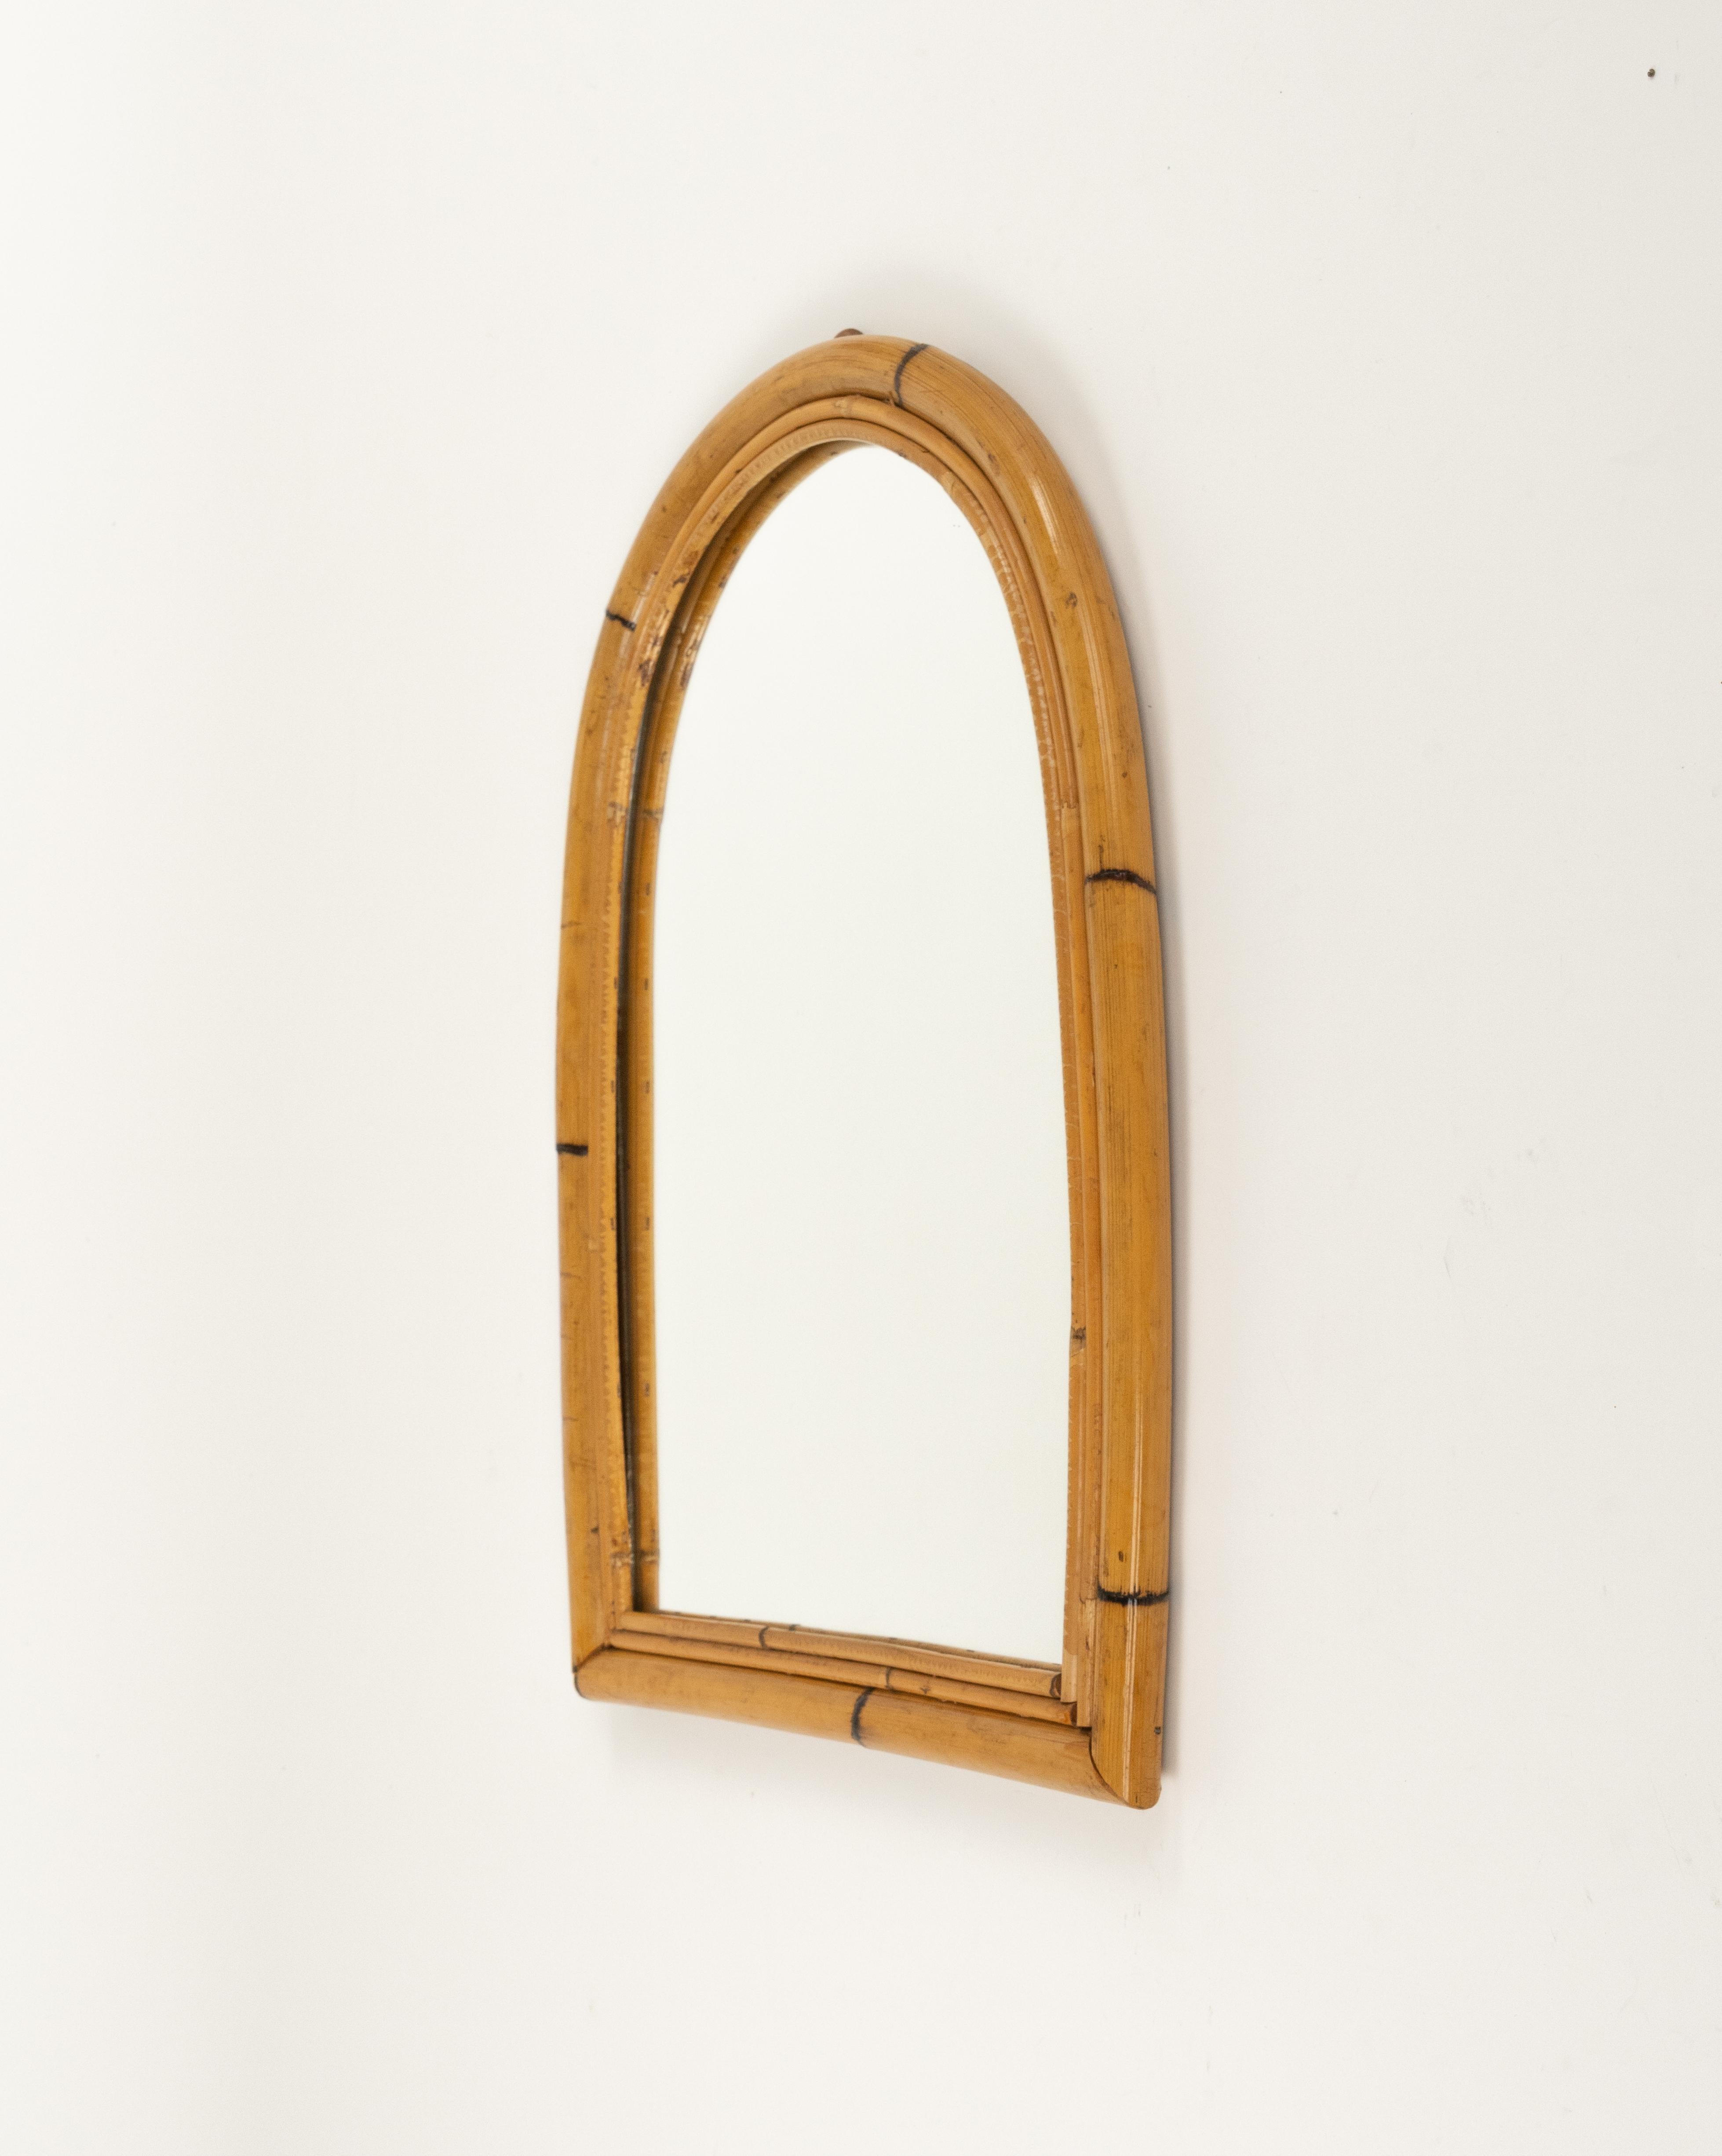 Midcentury Rattan and Bamboo Arched Wall Mirror, Italy 1960s For Sale 3